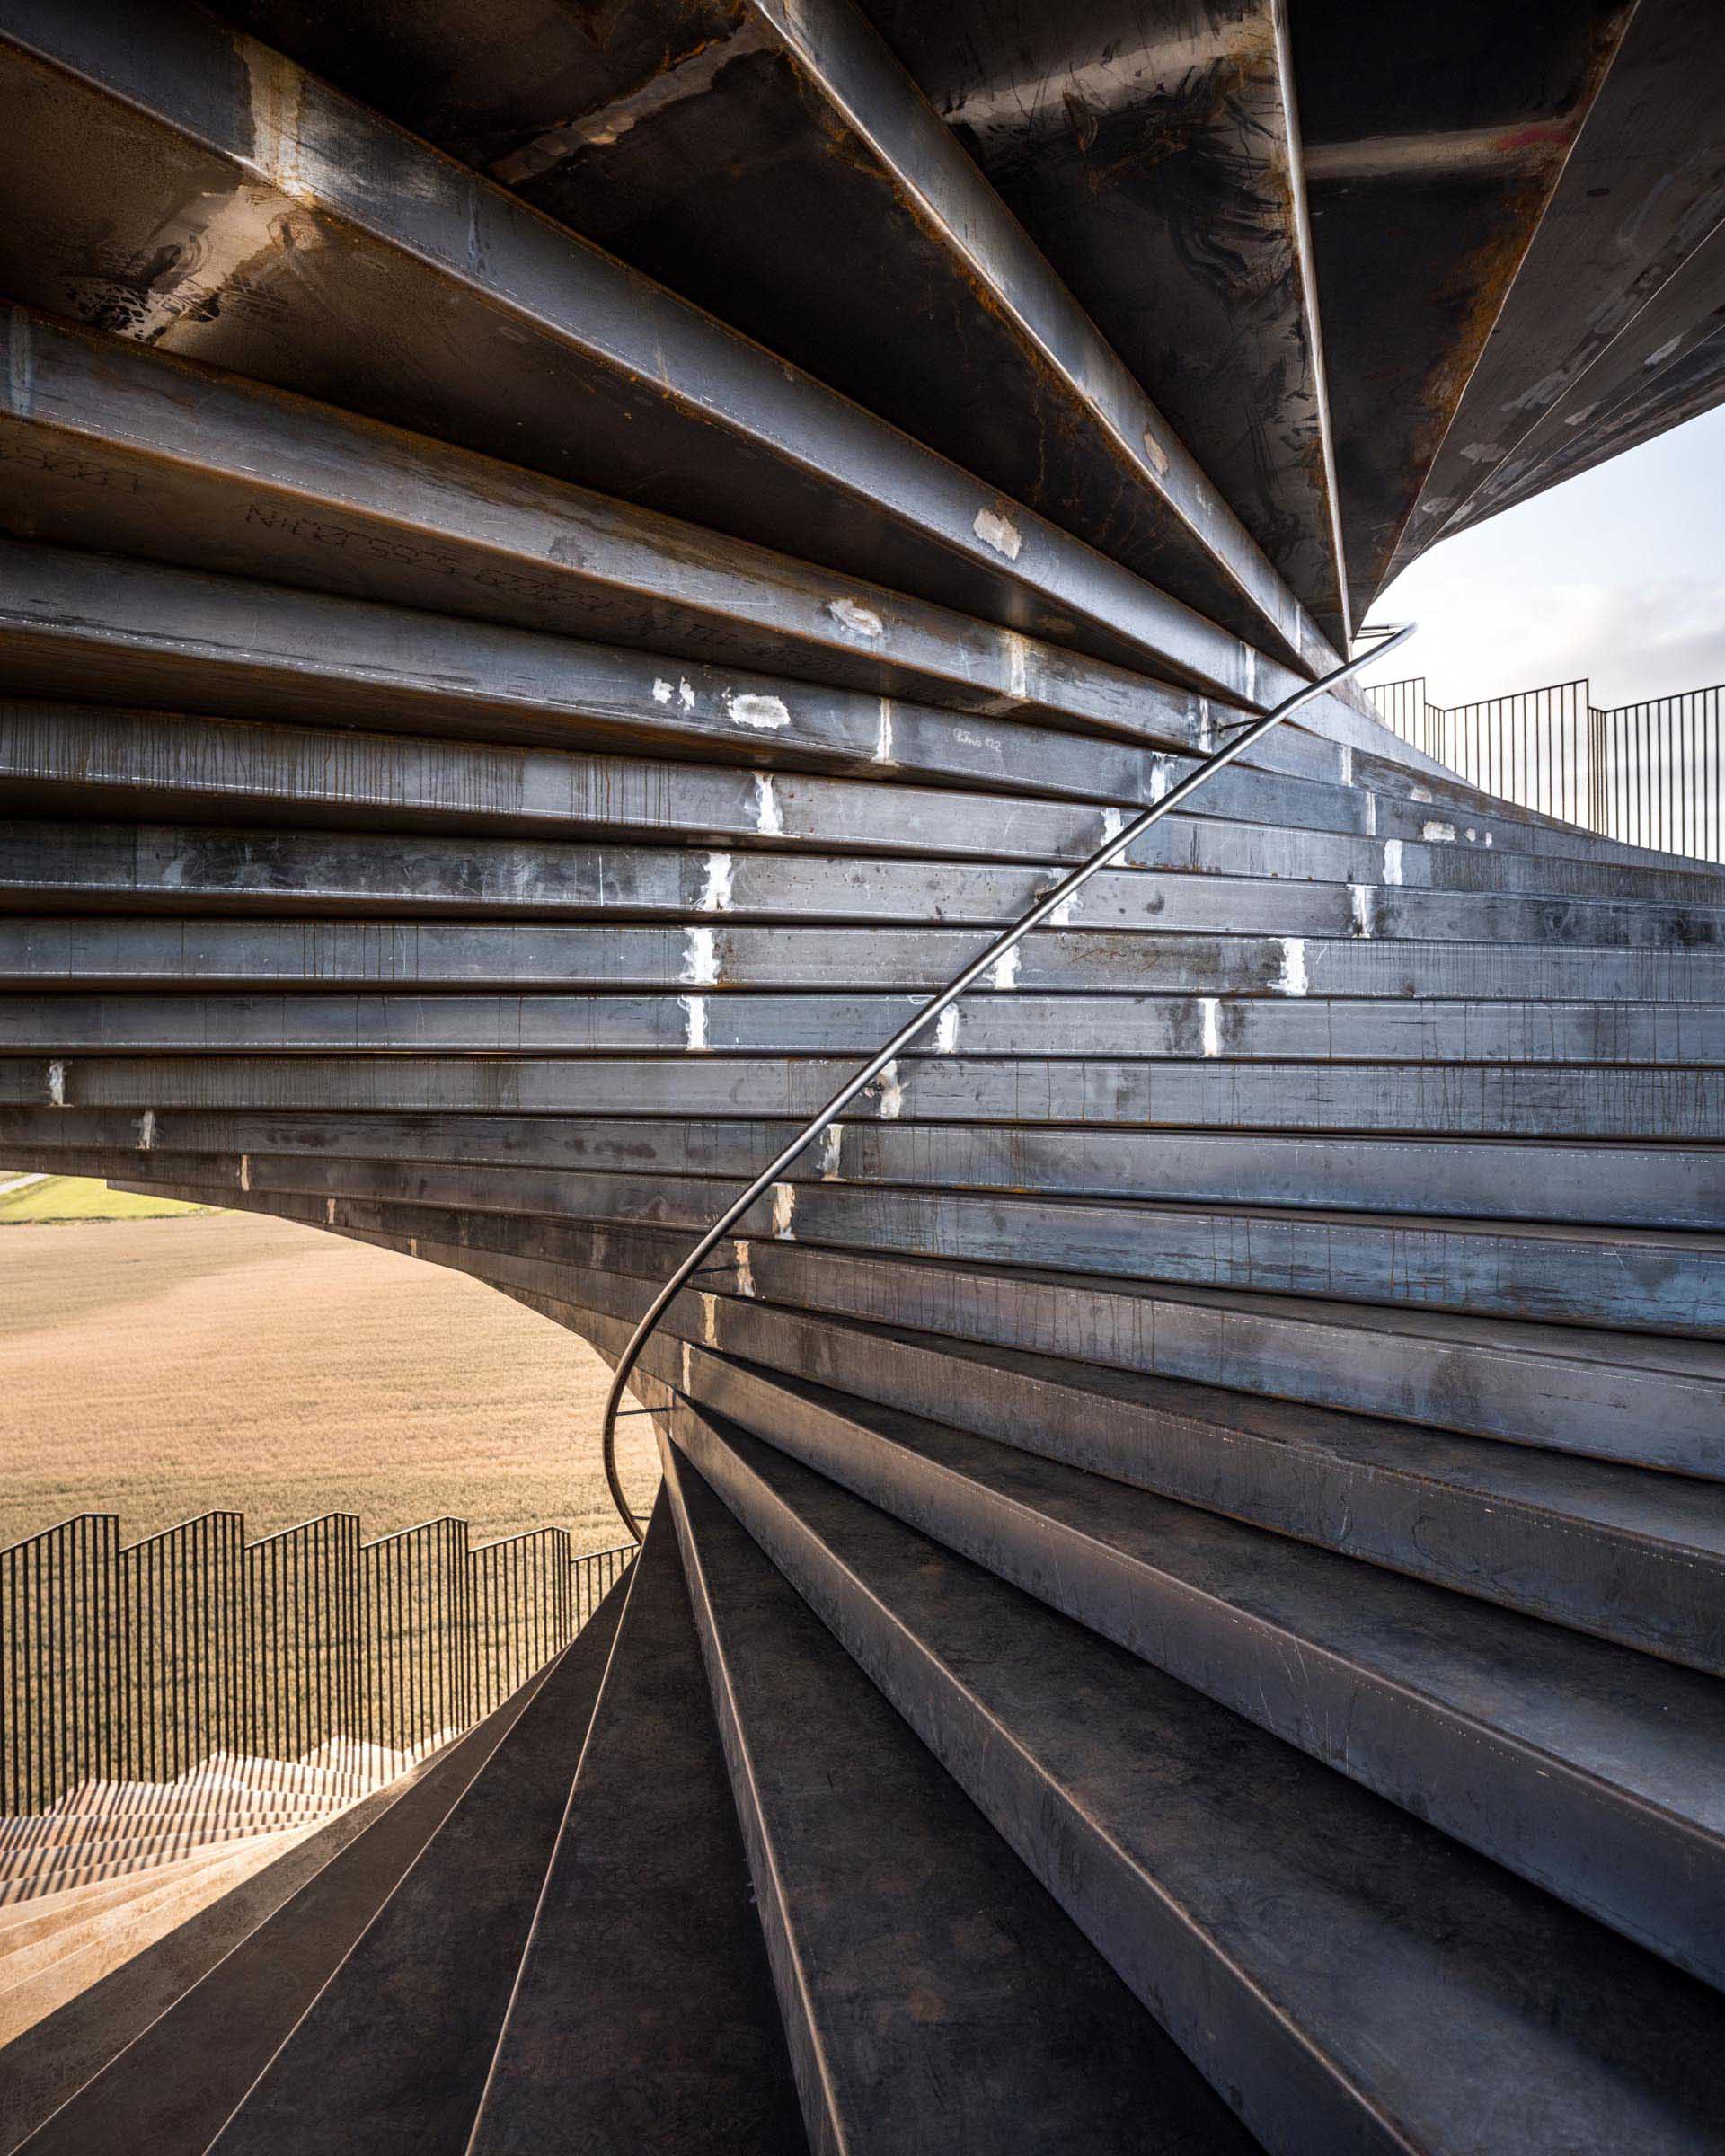 A new spiraling lookout tower in Denmark made from weathered steel.